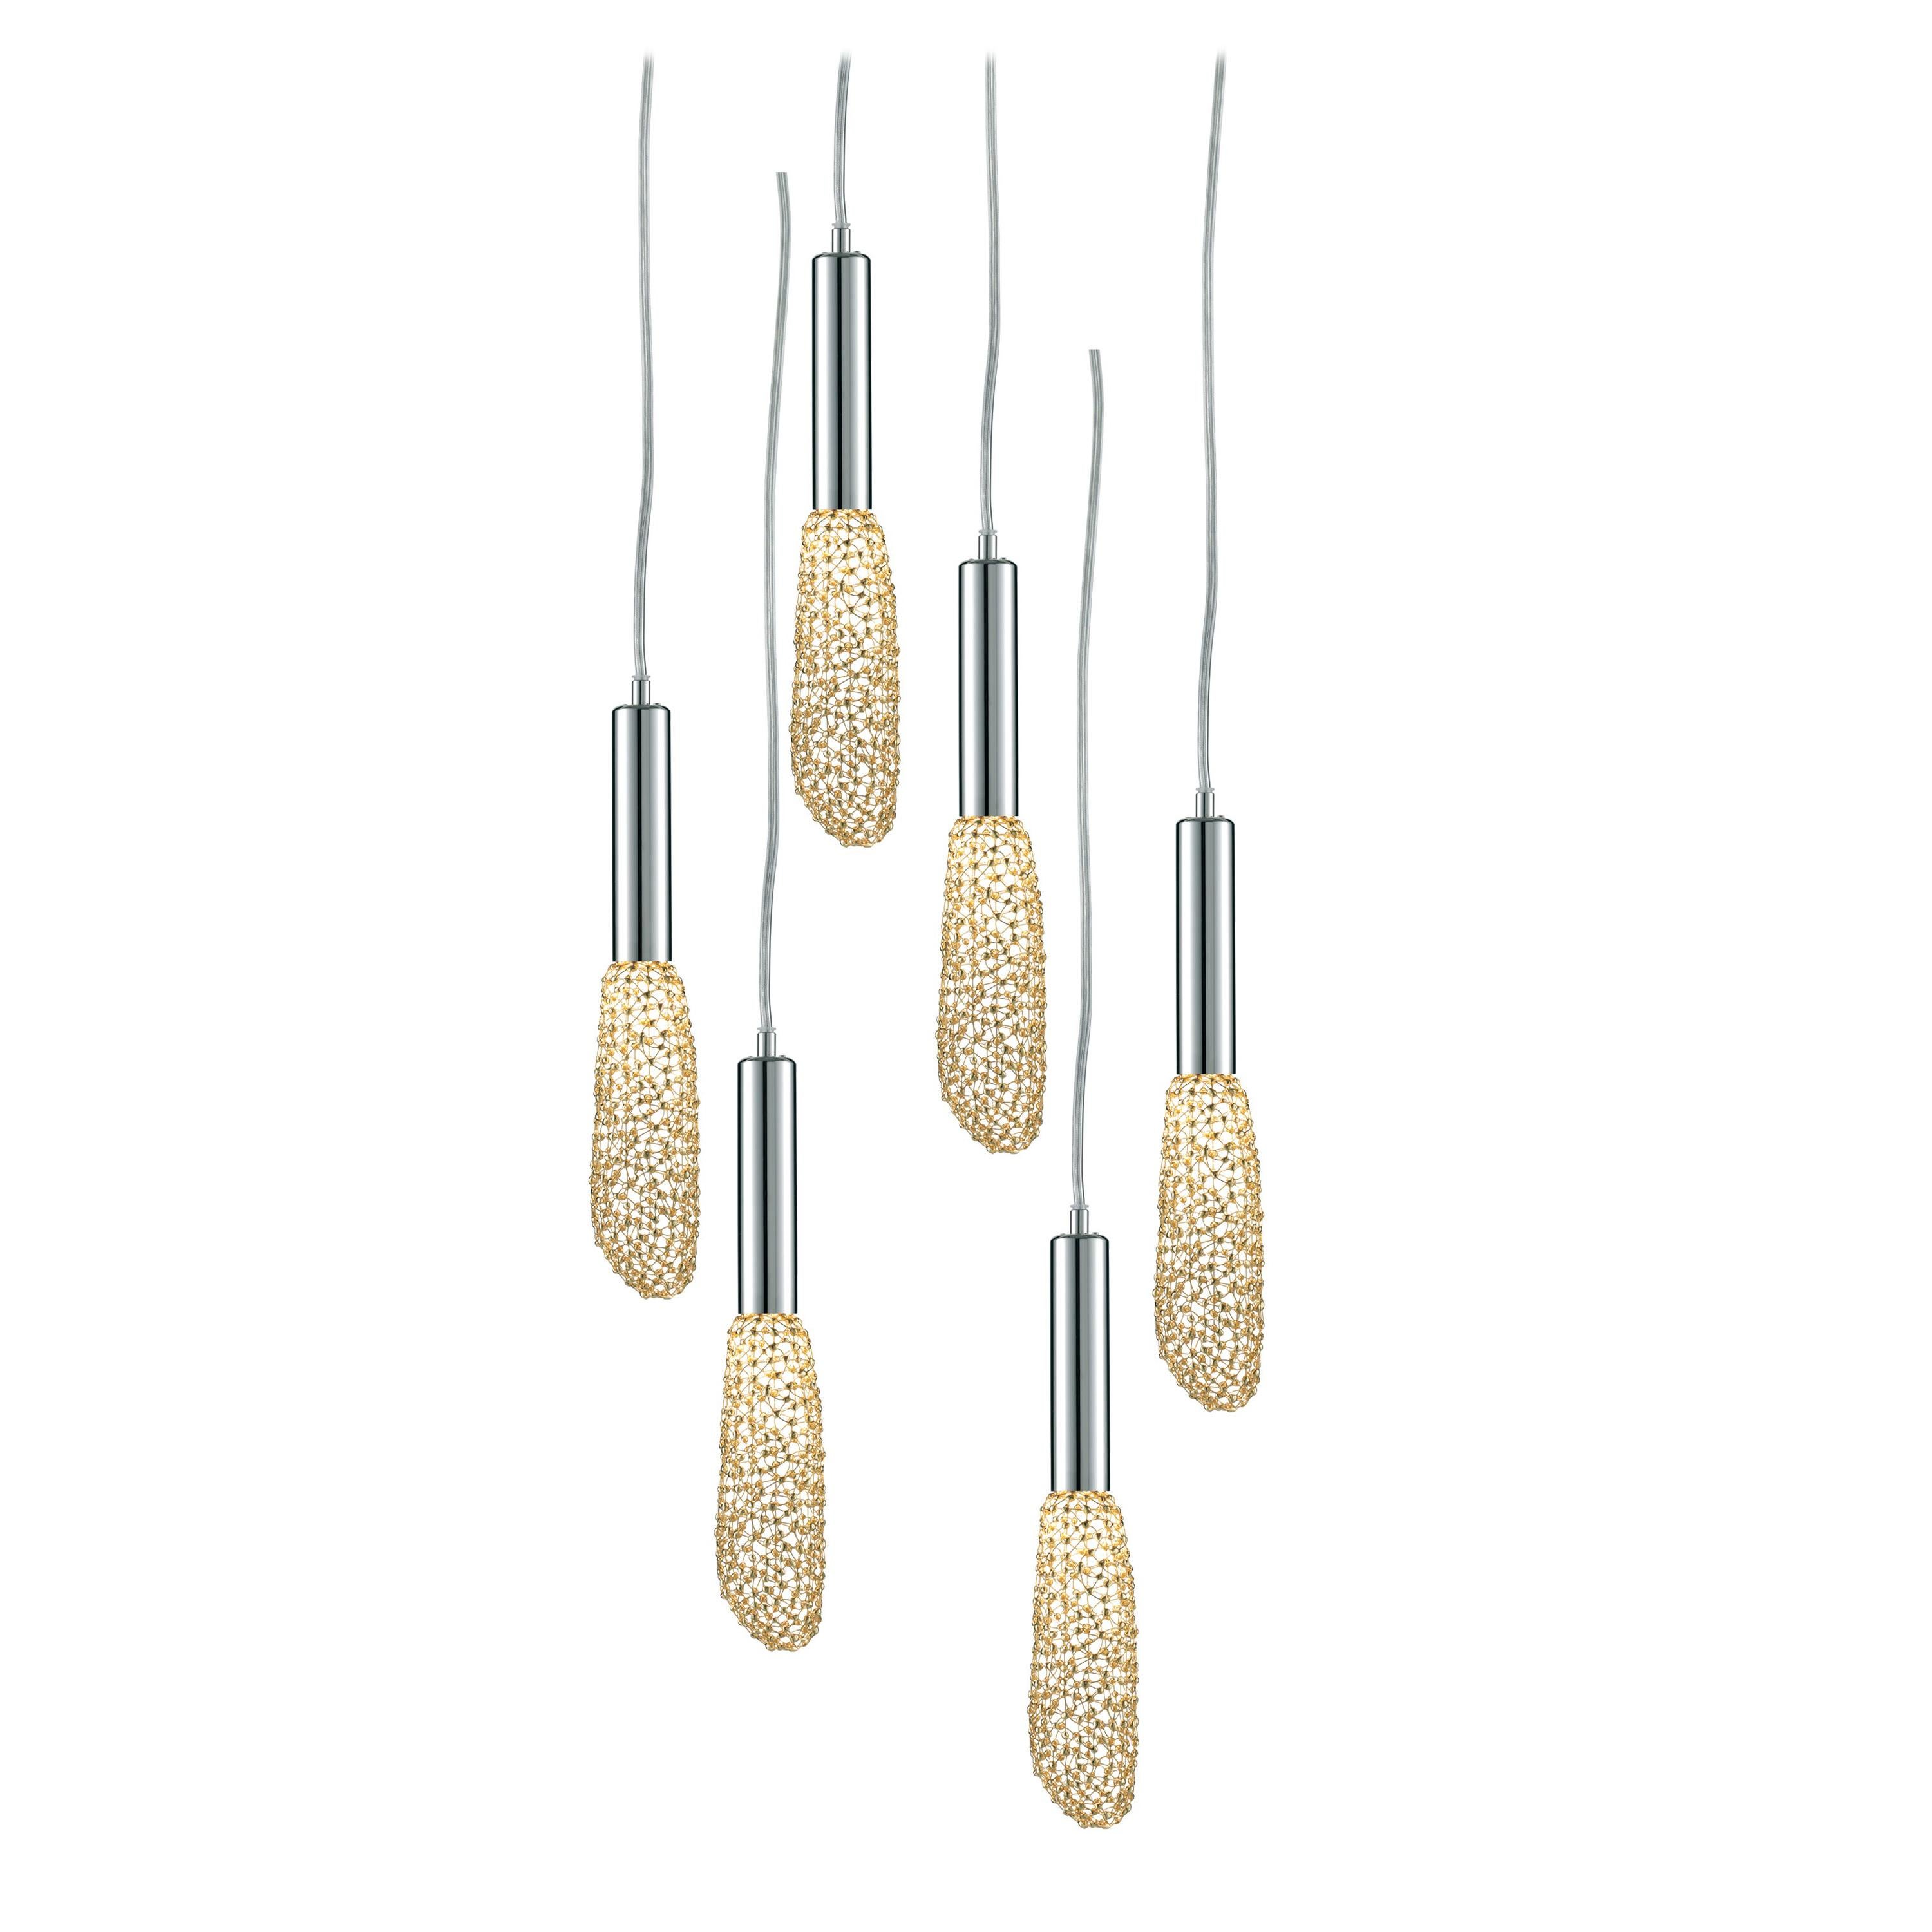 Firmament-1 'Gold' by Ango, Handcrafted Chandelier for 21st Century For Sale